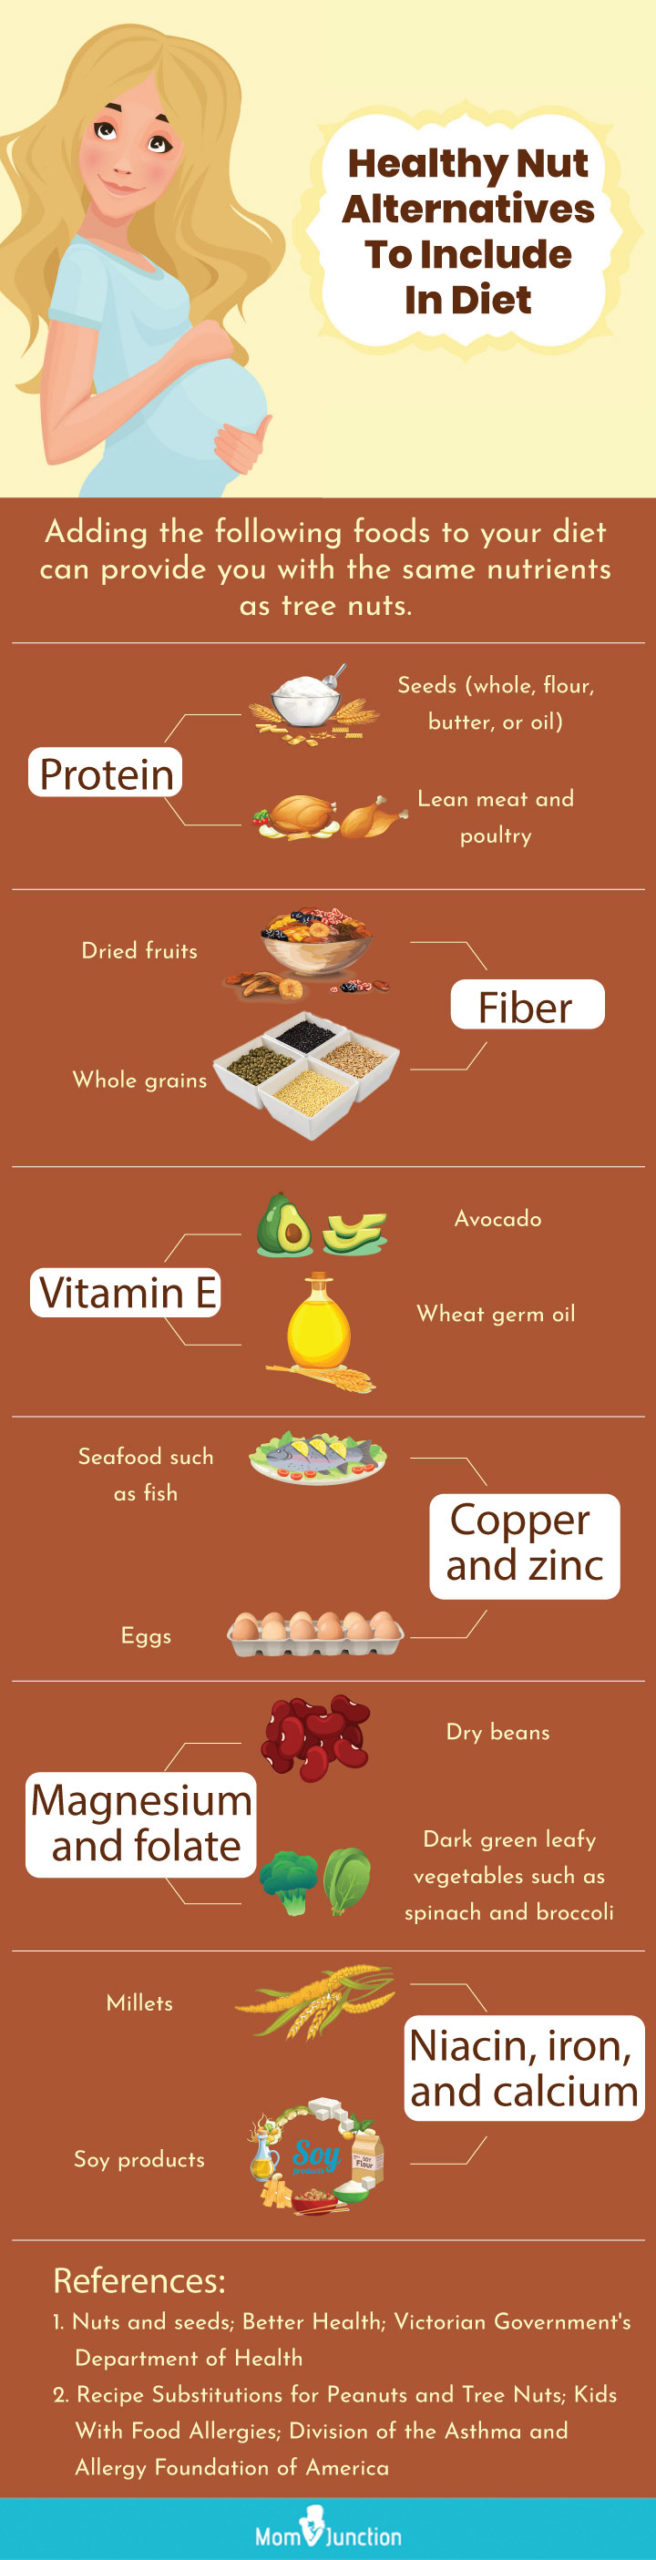 nuts during pregnancy(infographic)